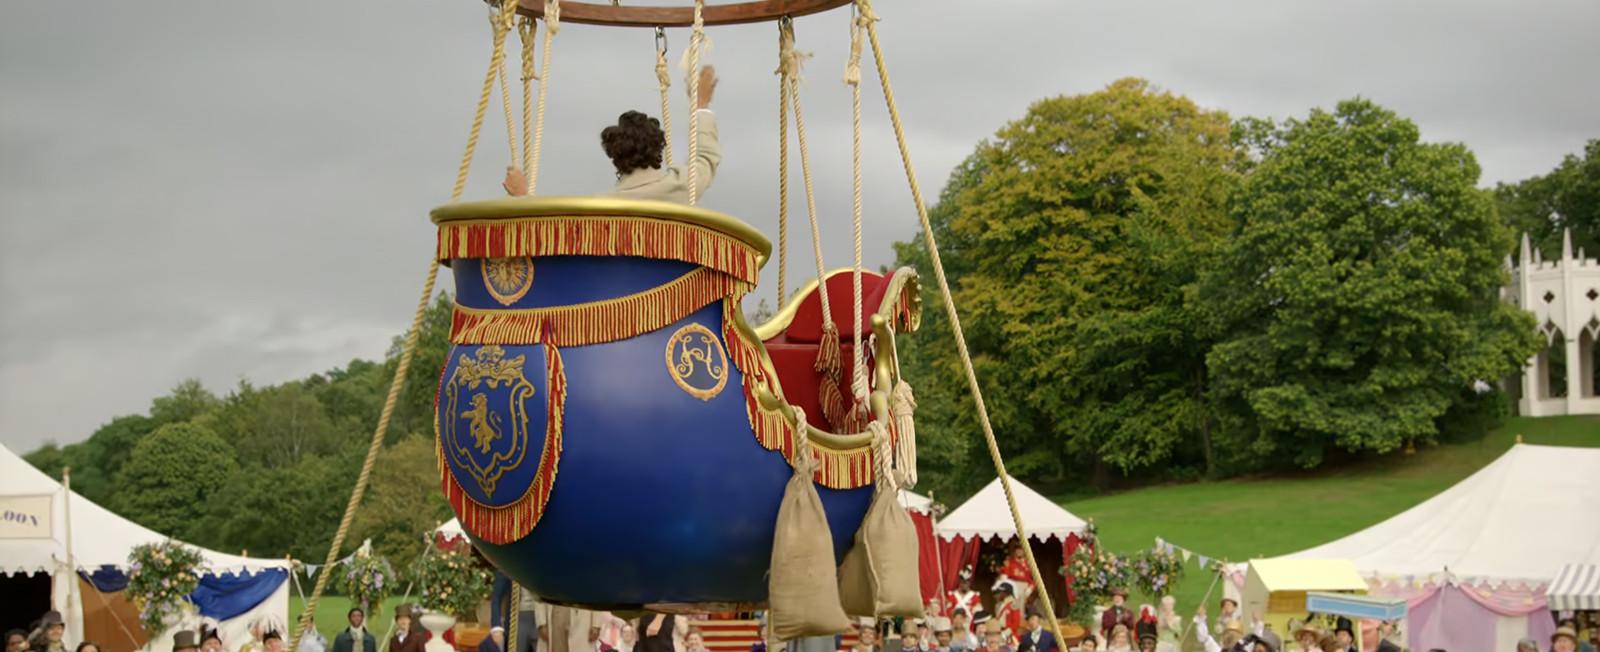 A royal blue and fringed hot air balloon in the air with a man waving at people on the ground